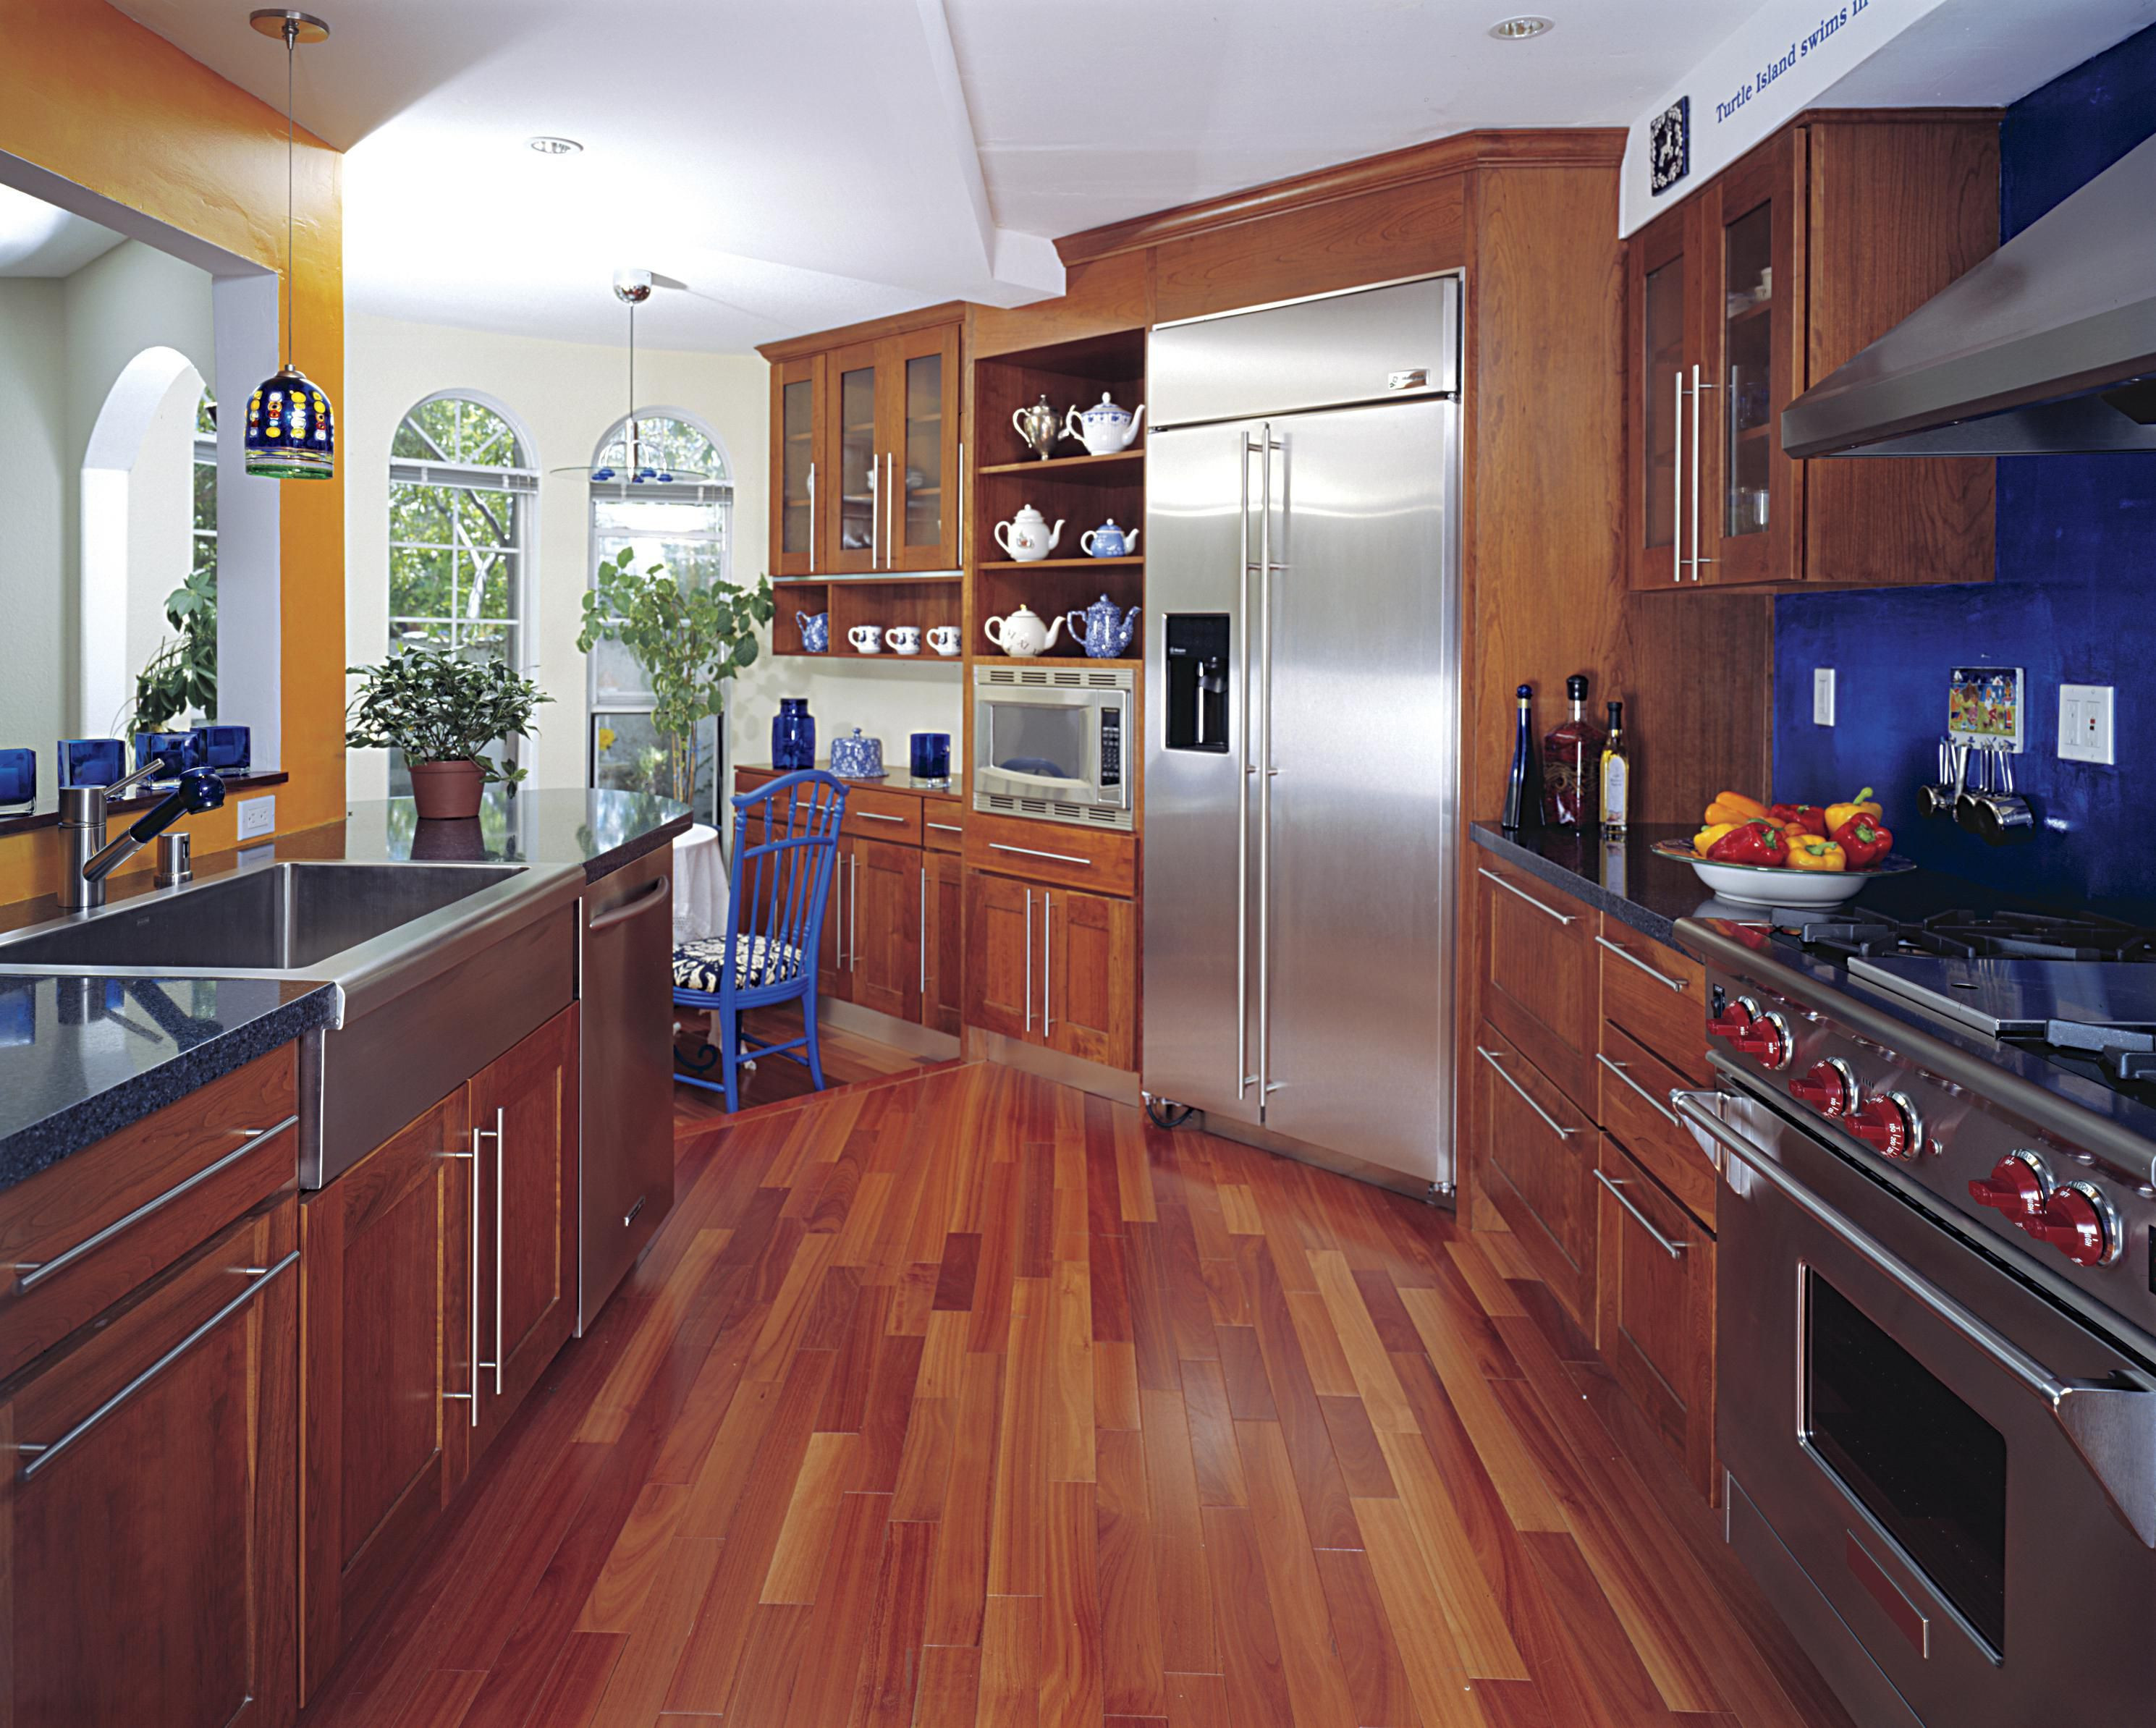 24 Fabulous Diy Engineered Hardwood Floor Installation 2024 free download diy engineered hardwood floor installation of hardwood floor in a kitchen is this allowed intended for 186828472 56a49f3a5f9b58b7d0d7e142